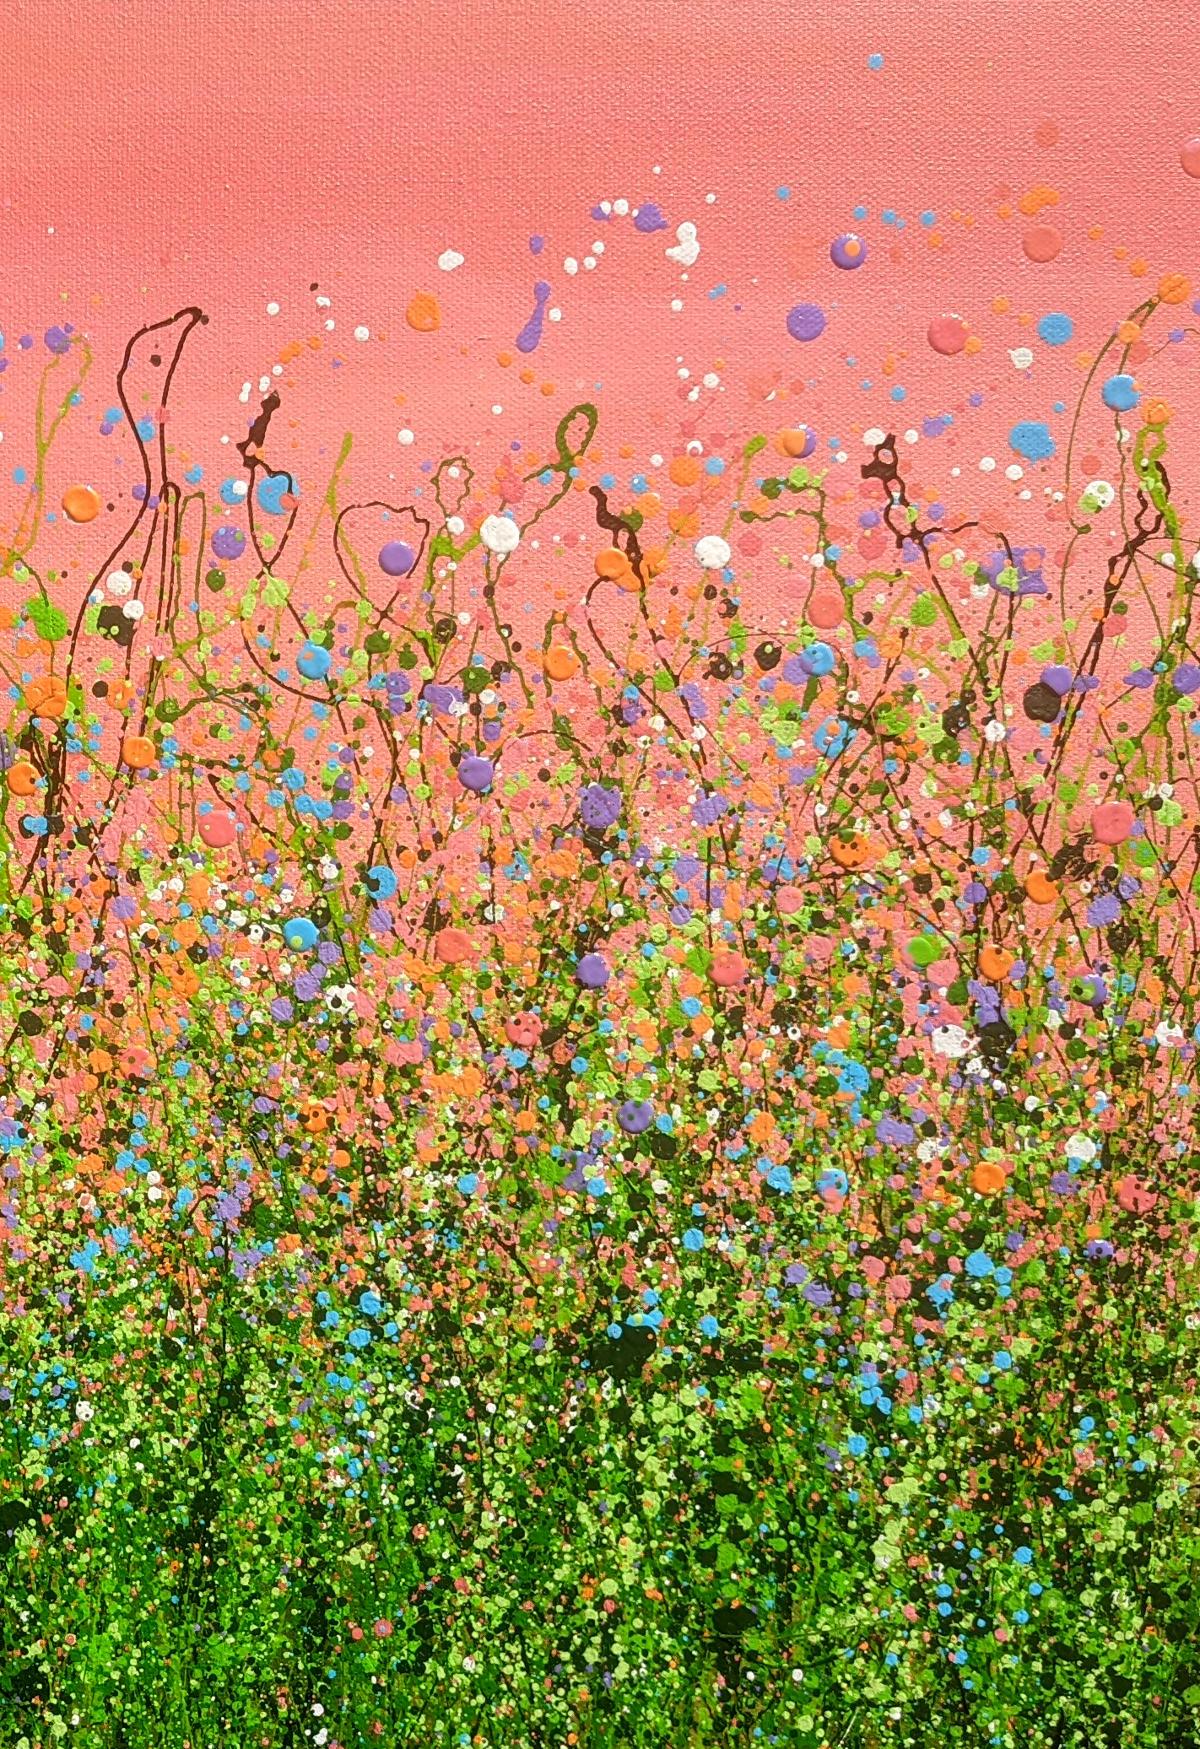 Flamingo Sky Meadows #5 by Lucy Moore, Floral, Wildflowers, Contemporary art - Painting by Lucy Moore 